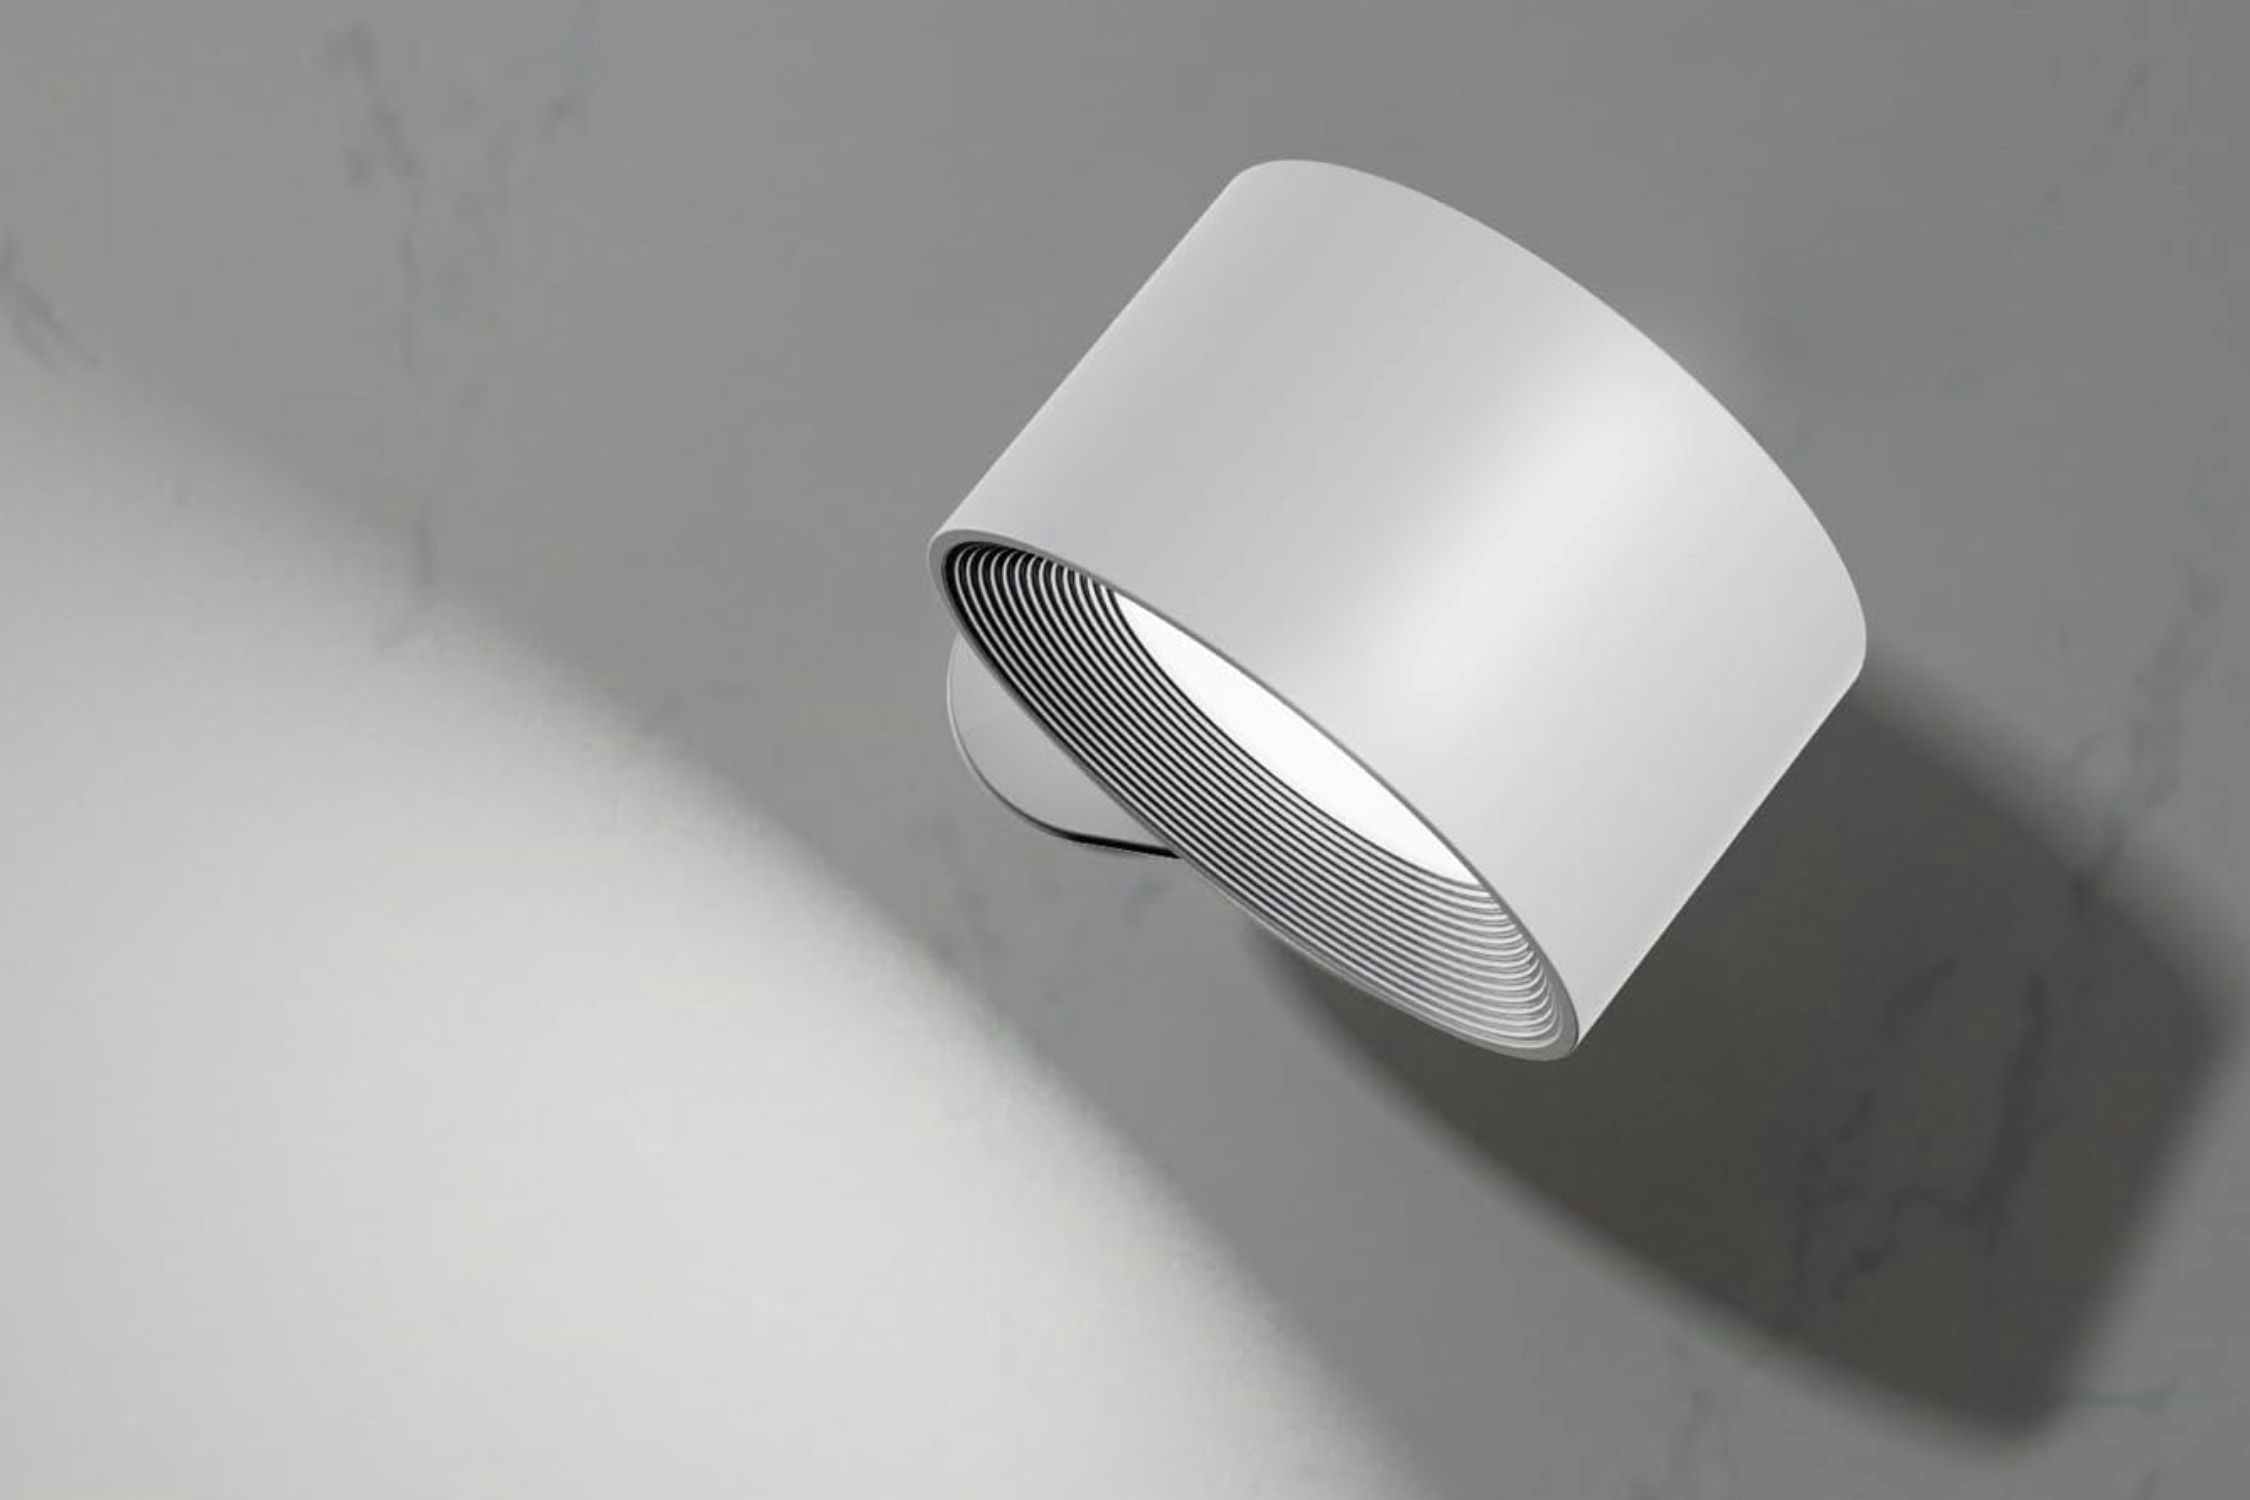 LED Wall Sconce, Only $6 on Amazon 